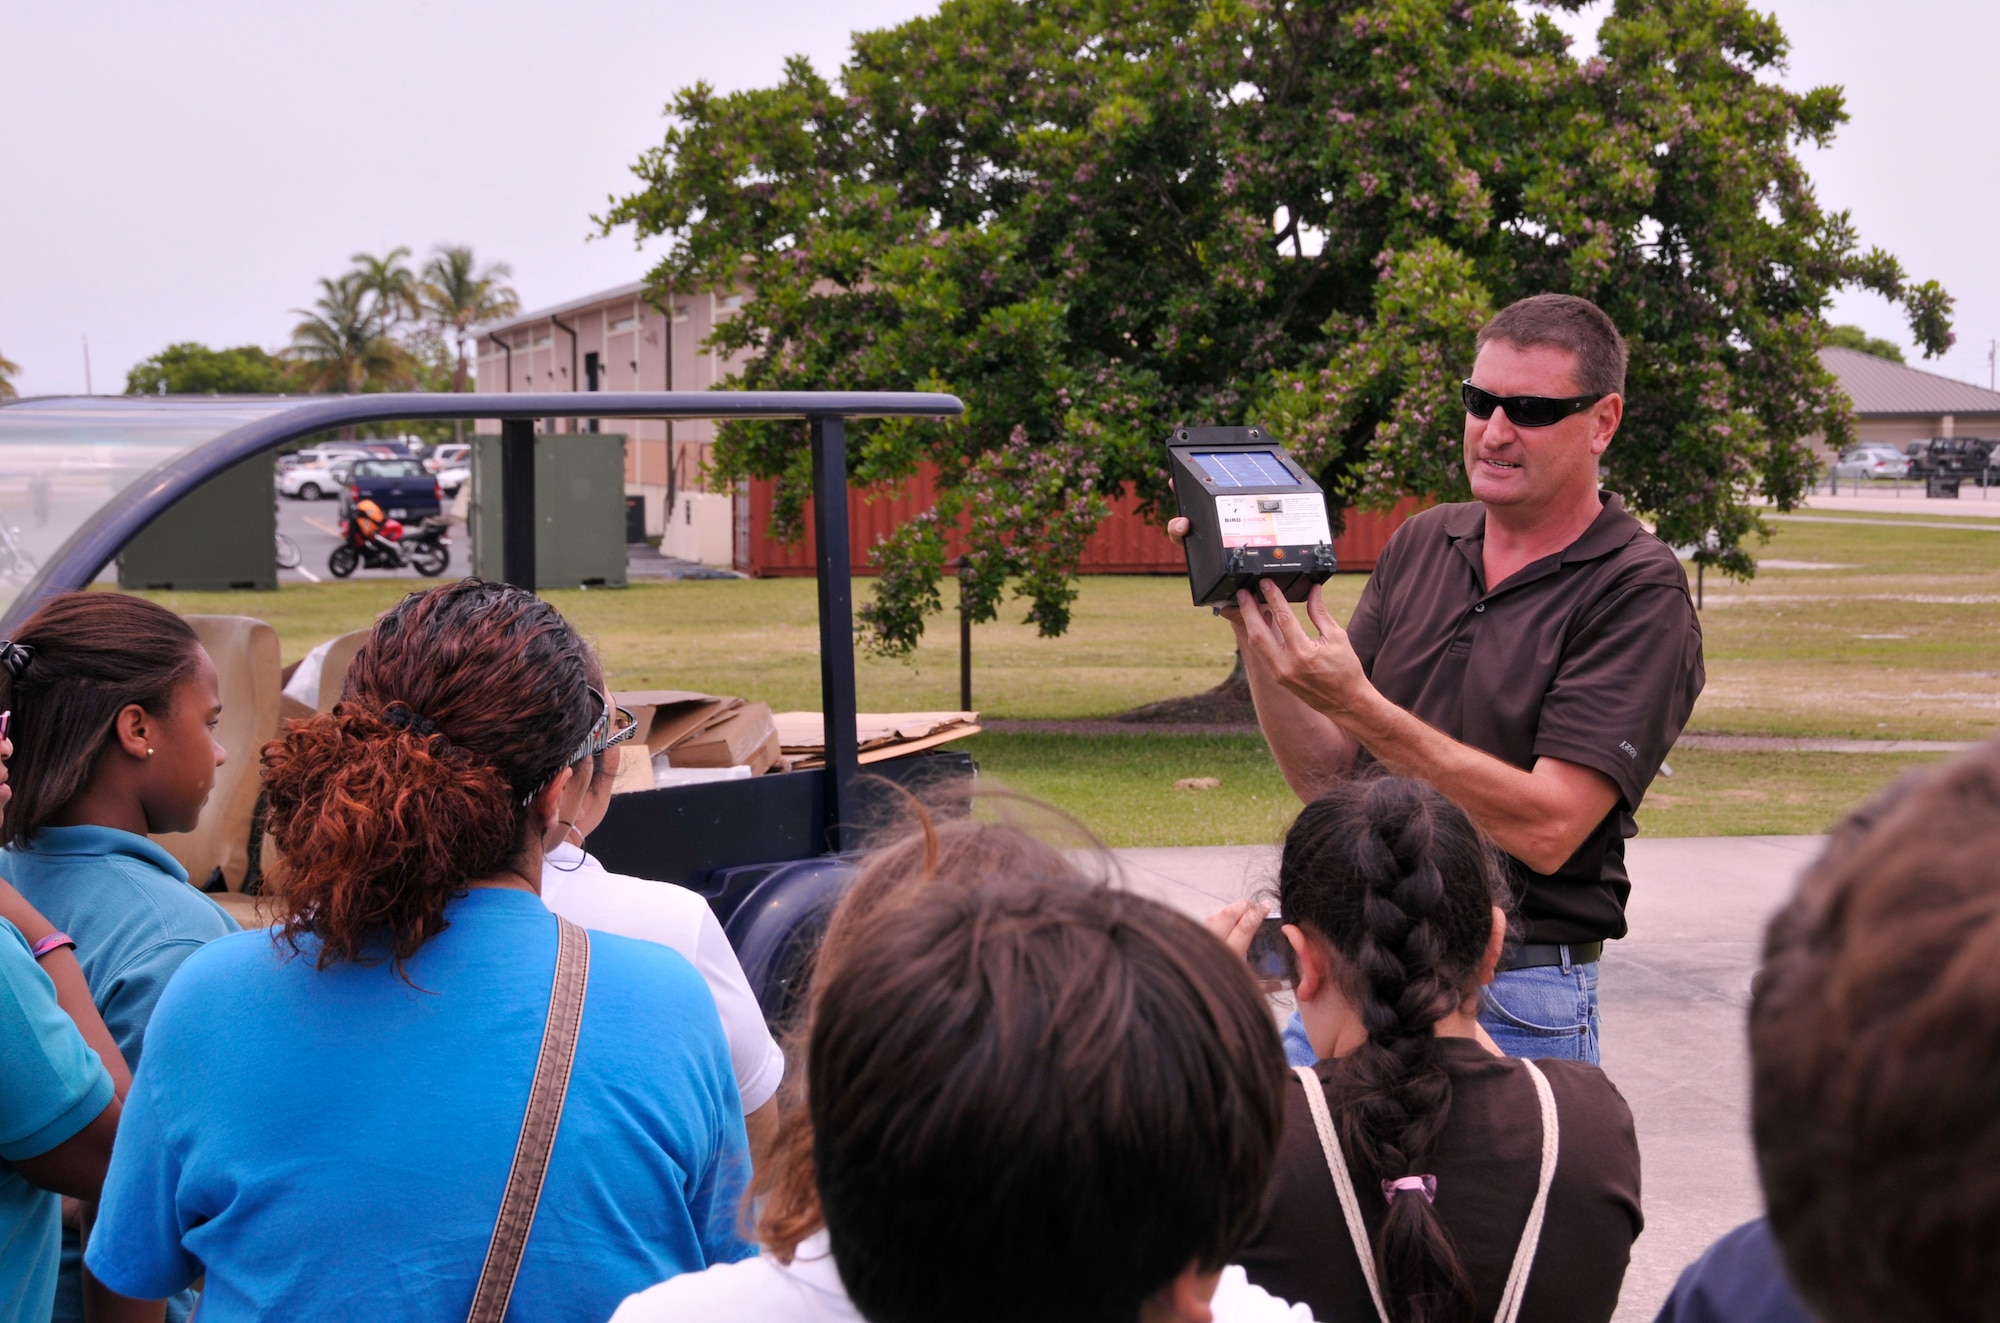 Mr. Tim Driscoll, Homestead Air Reserve Base environmental protection specialist, demonstrates how the base utilizes solar power to students from Homestead, Fla.’s Air Base Elementary Green Team during an environmental tour at Homestead Air Reserve Base, Fla., May 13. The environmental tour was conducted as an educational experience for the Green Team in conjunction with Earth Day. The team includes more than 25 children, from grades three through five, who are part of the environmentally focused school club. (U.S. Air Force photo/Senior Airman Nicholas Caceres)